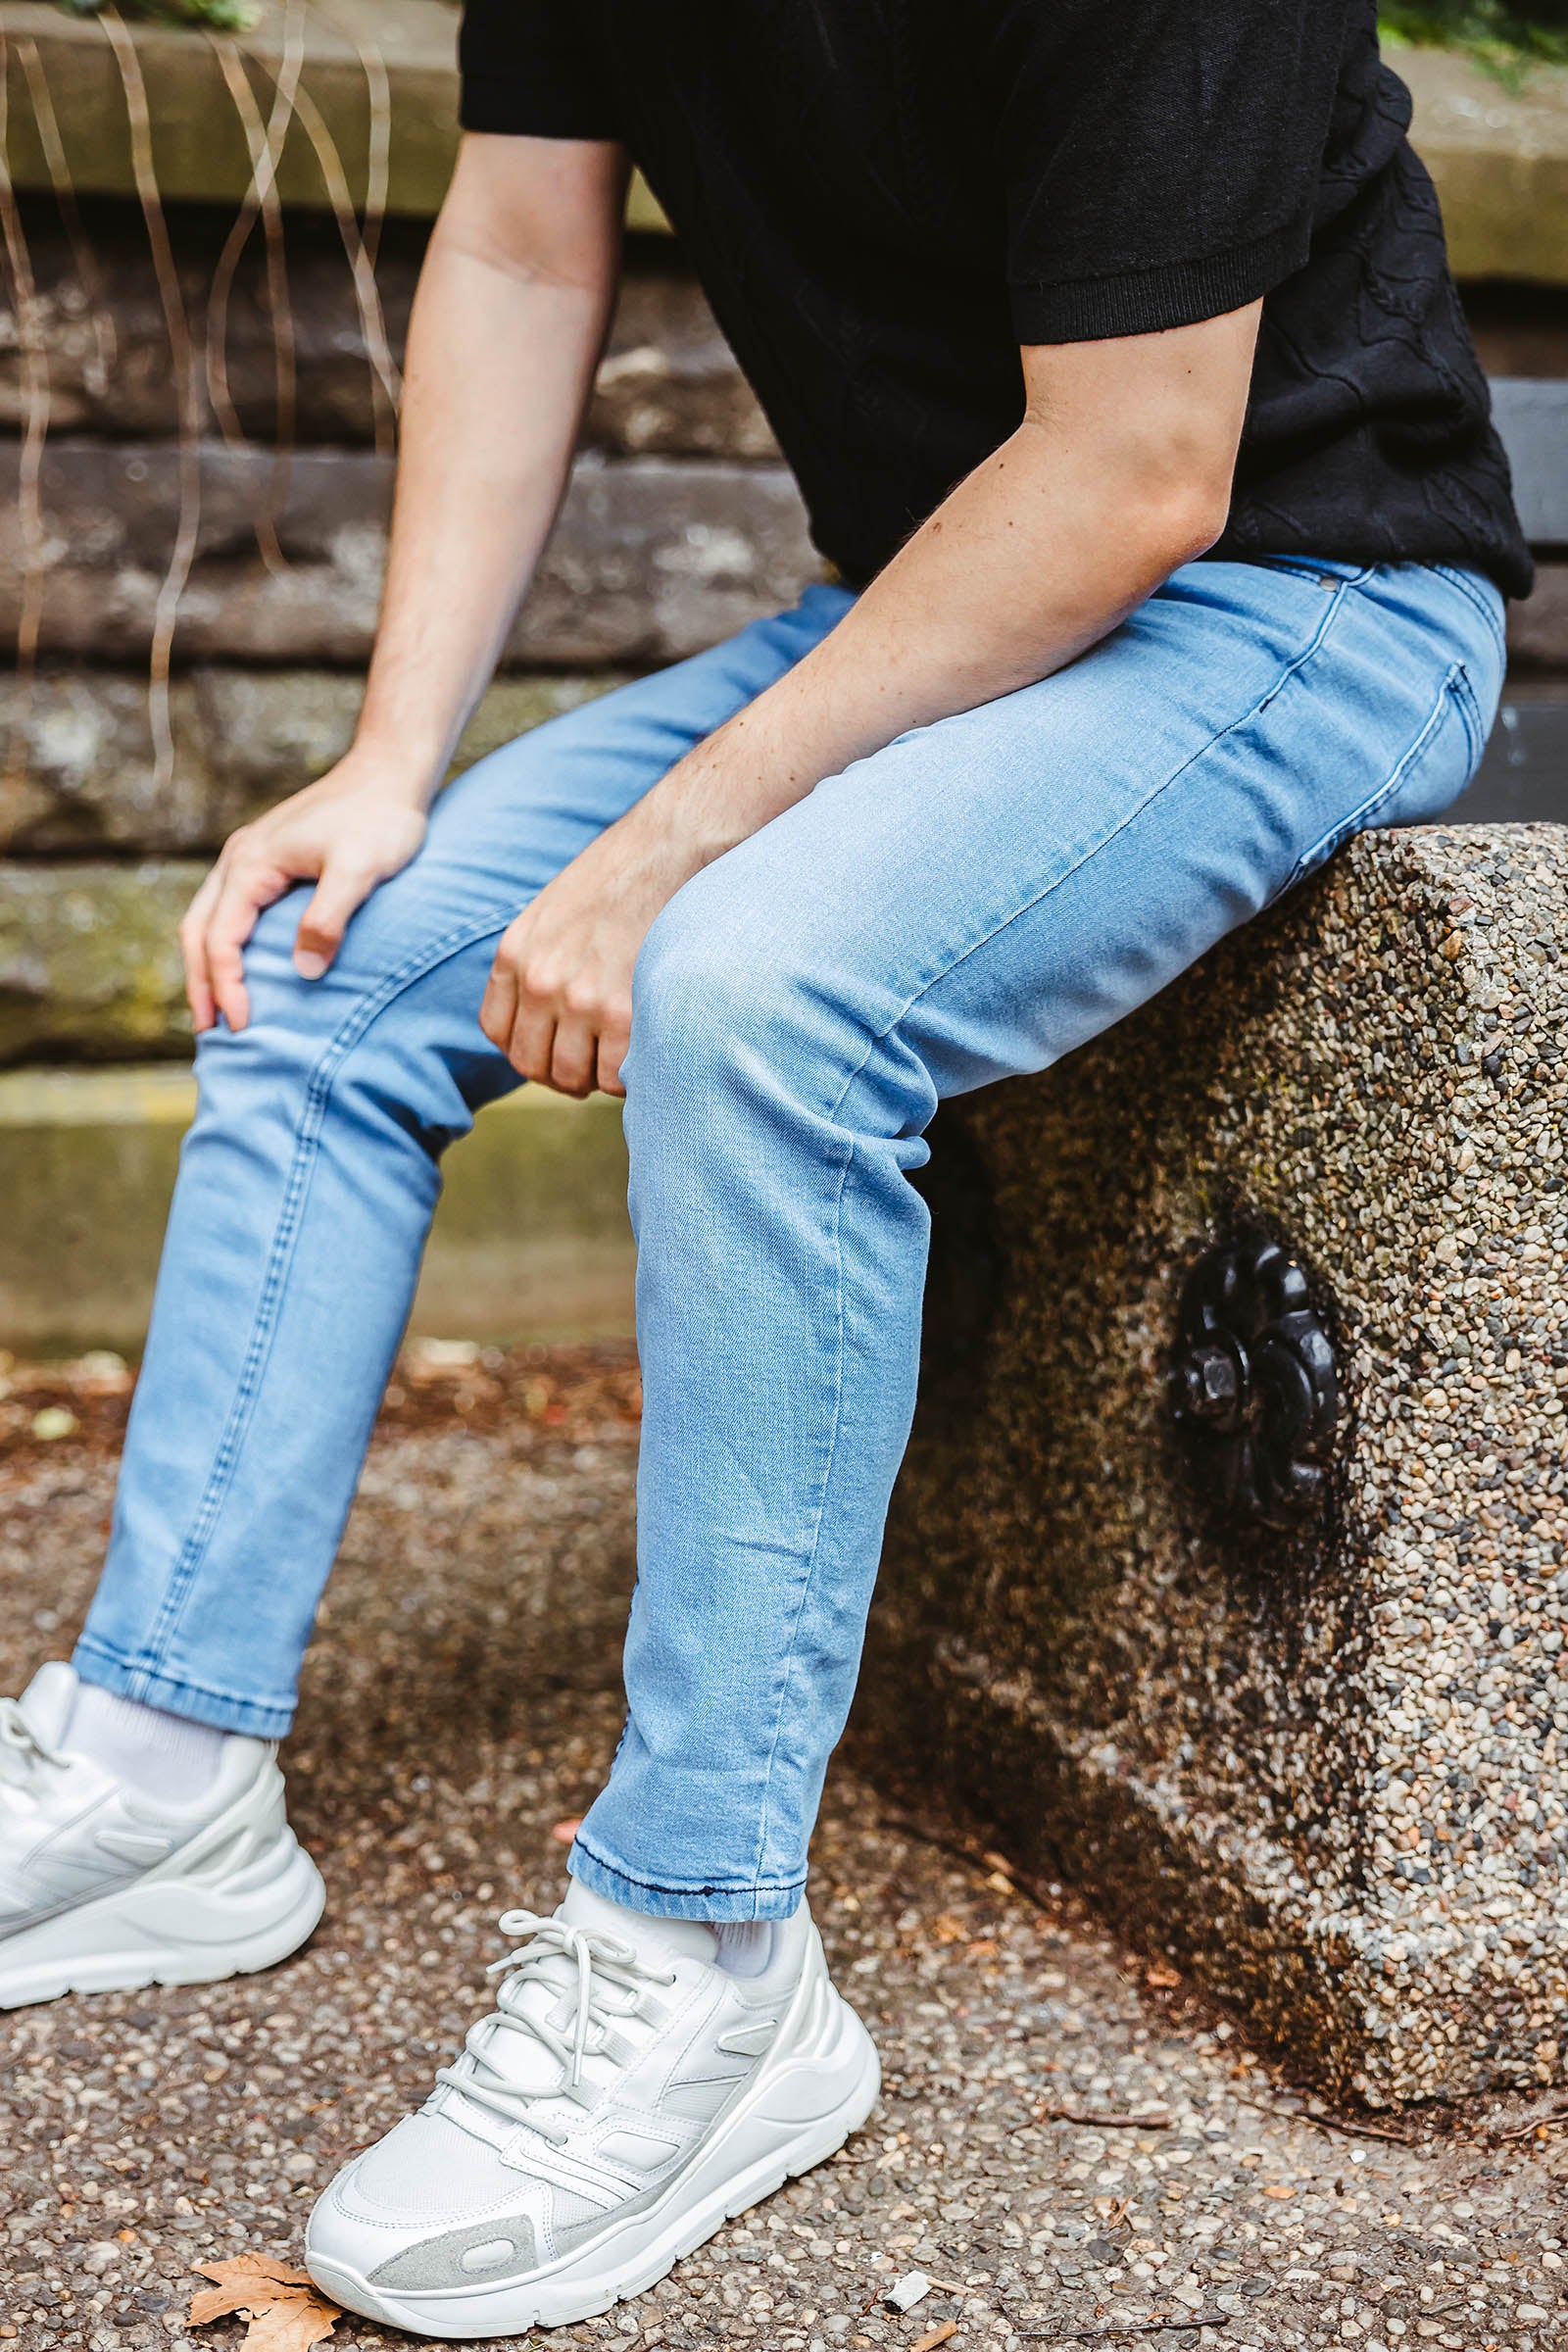 A person wearing light blue jeans and white sneakers, sitting on a stone bench with their hands resting on their knees.